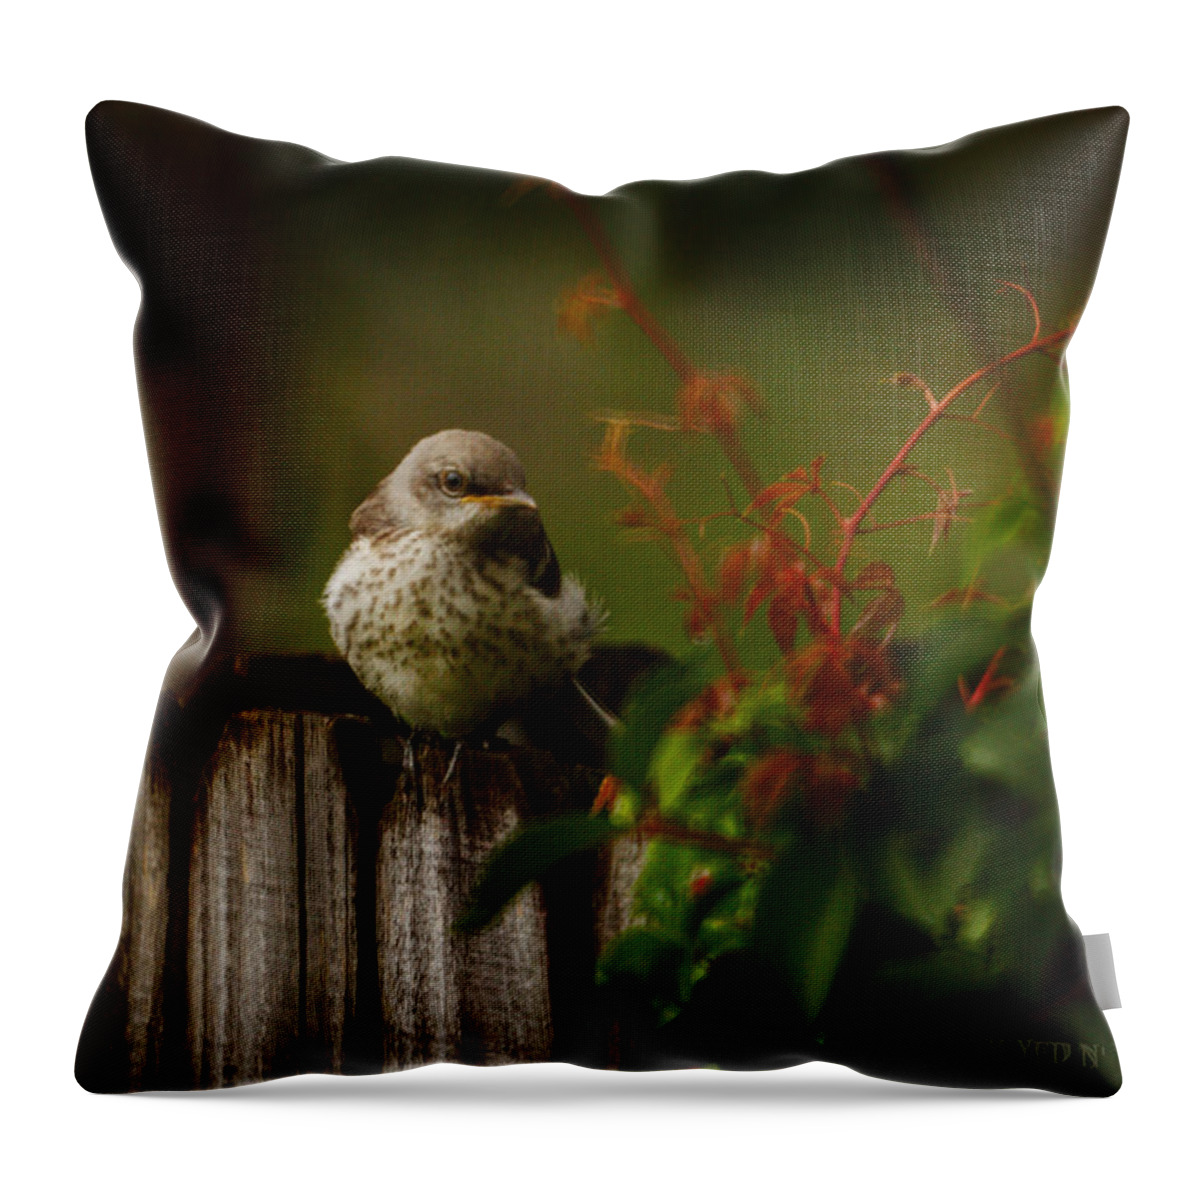 Bird Throw Pillow featuring the photograph Fledgling by Brenda Wilcox aka Wildeyed n Wicked